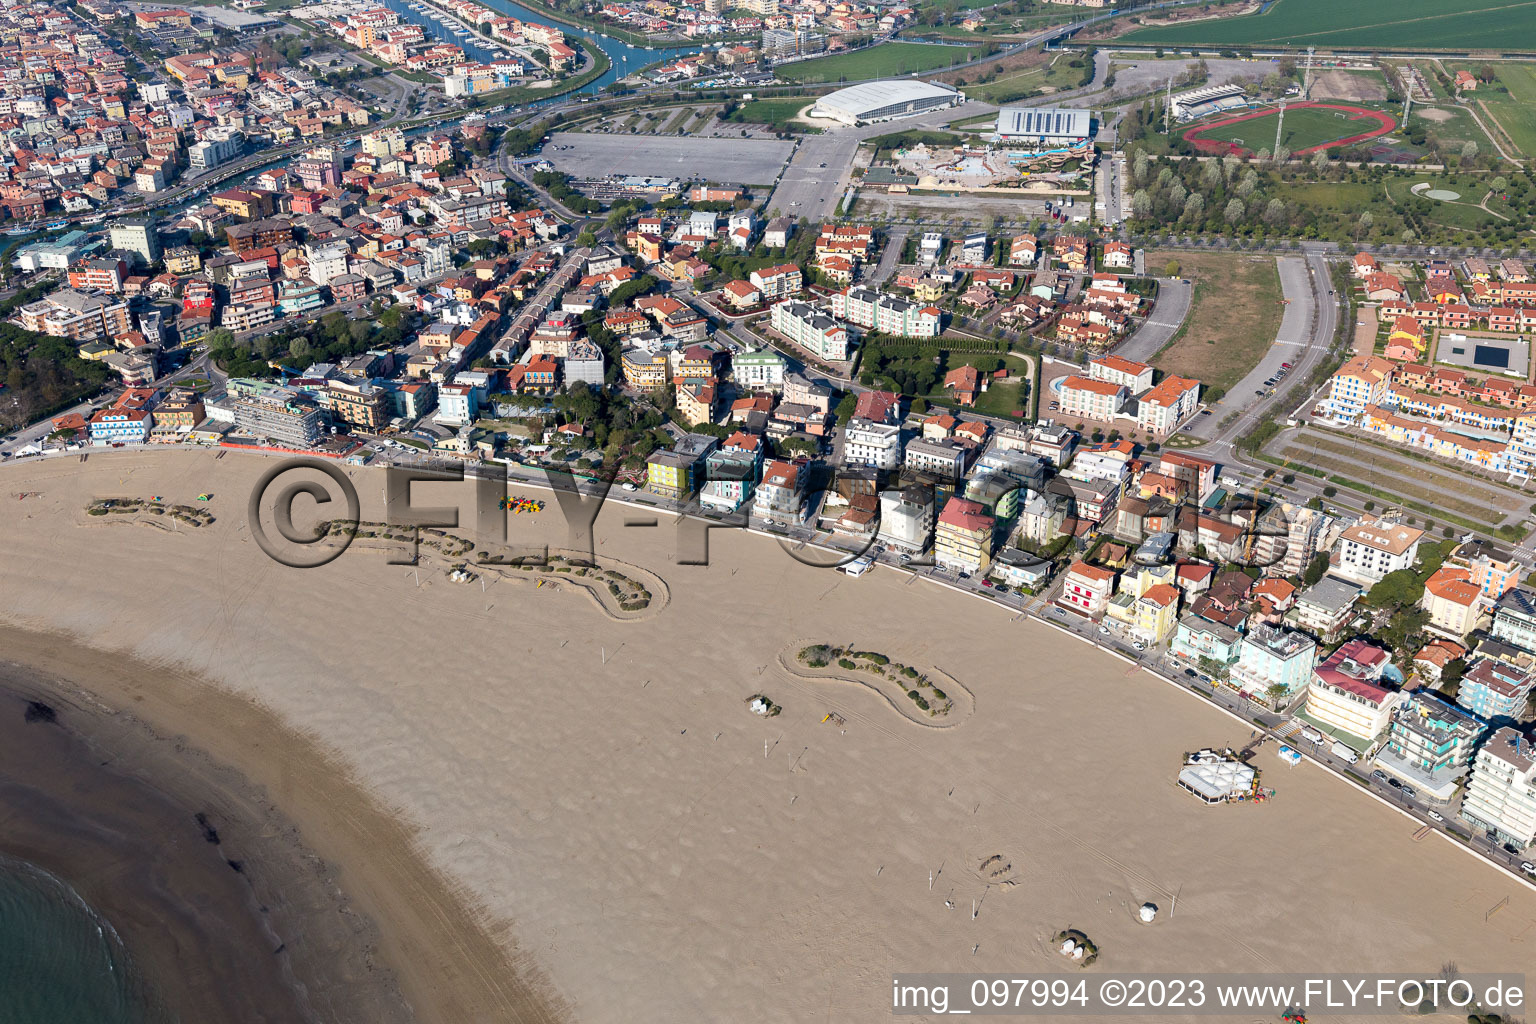 Drone recording of Caorle in the state Veneto, Italy